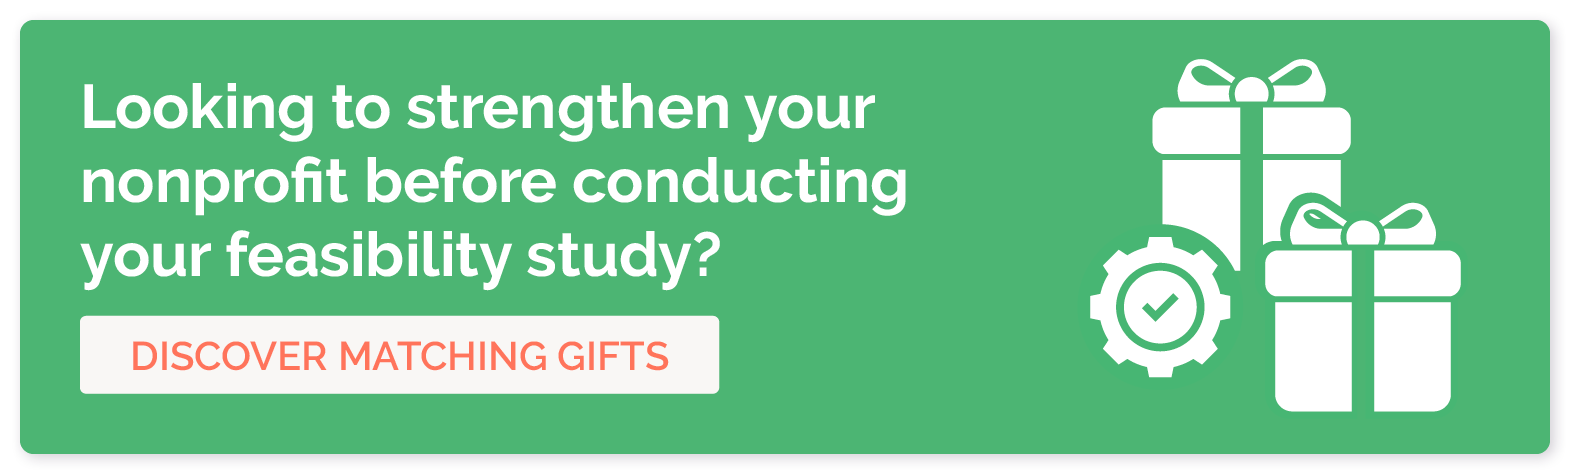 Looking to strengthen your nonprofit before conducting your feasibility study? Discover matching gifts?